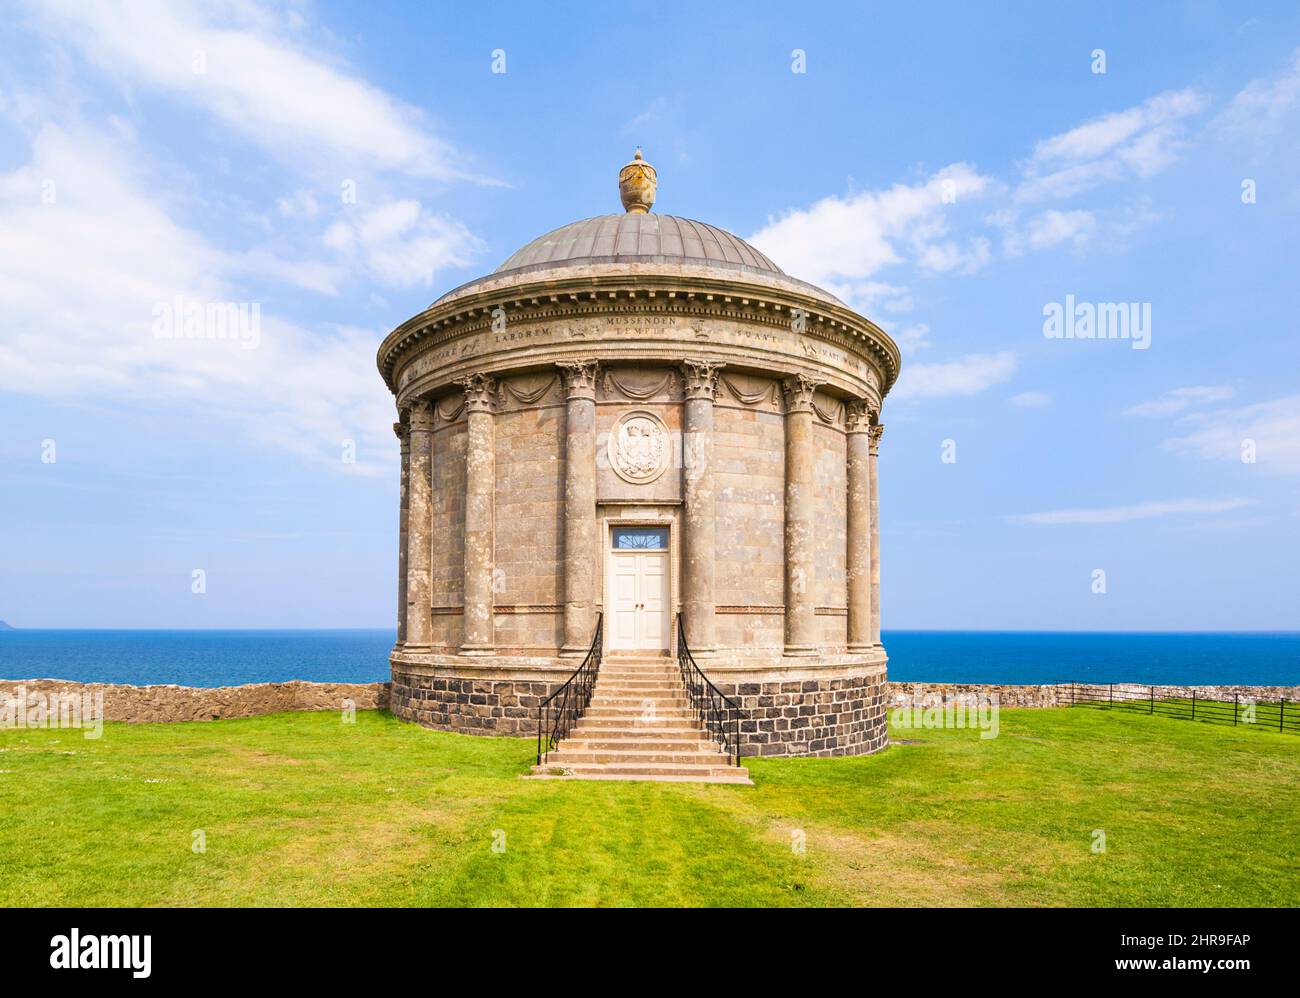 The Mussenden temple perched on a cliff edge part of the Downhill estate Downhill Demesne County Londonderry Northern Ireland UK GB Europe Stock Photo